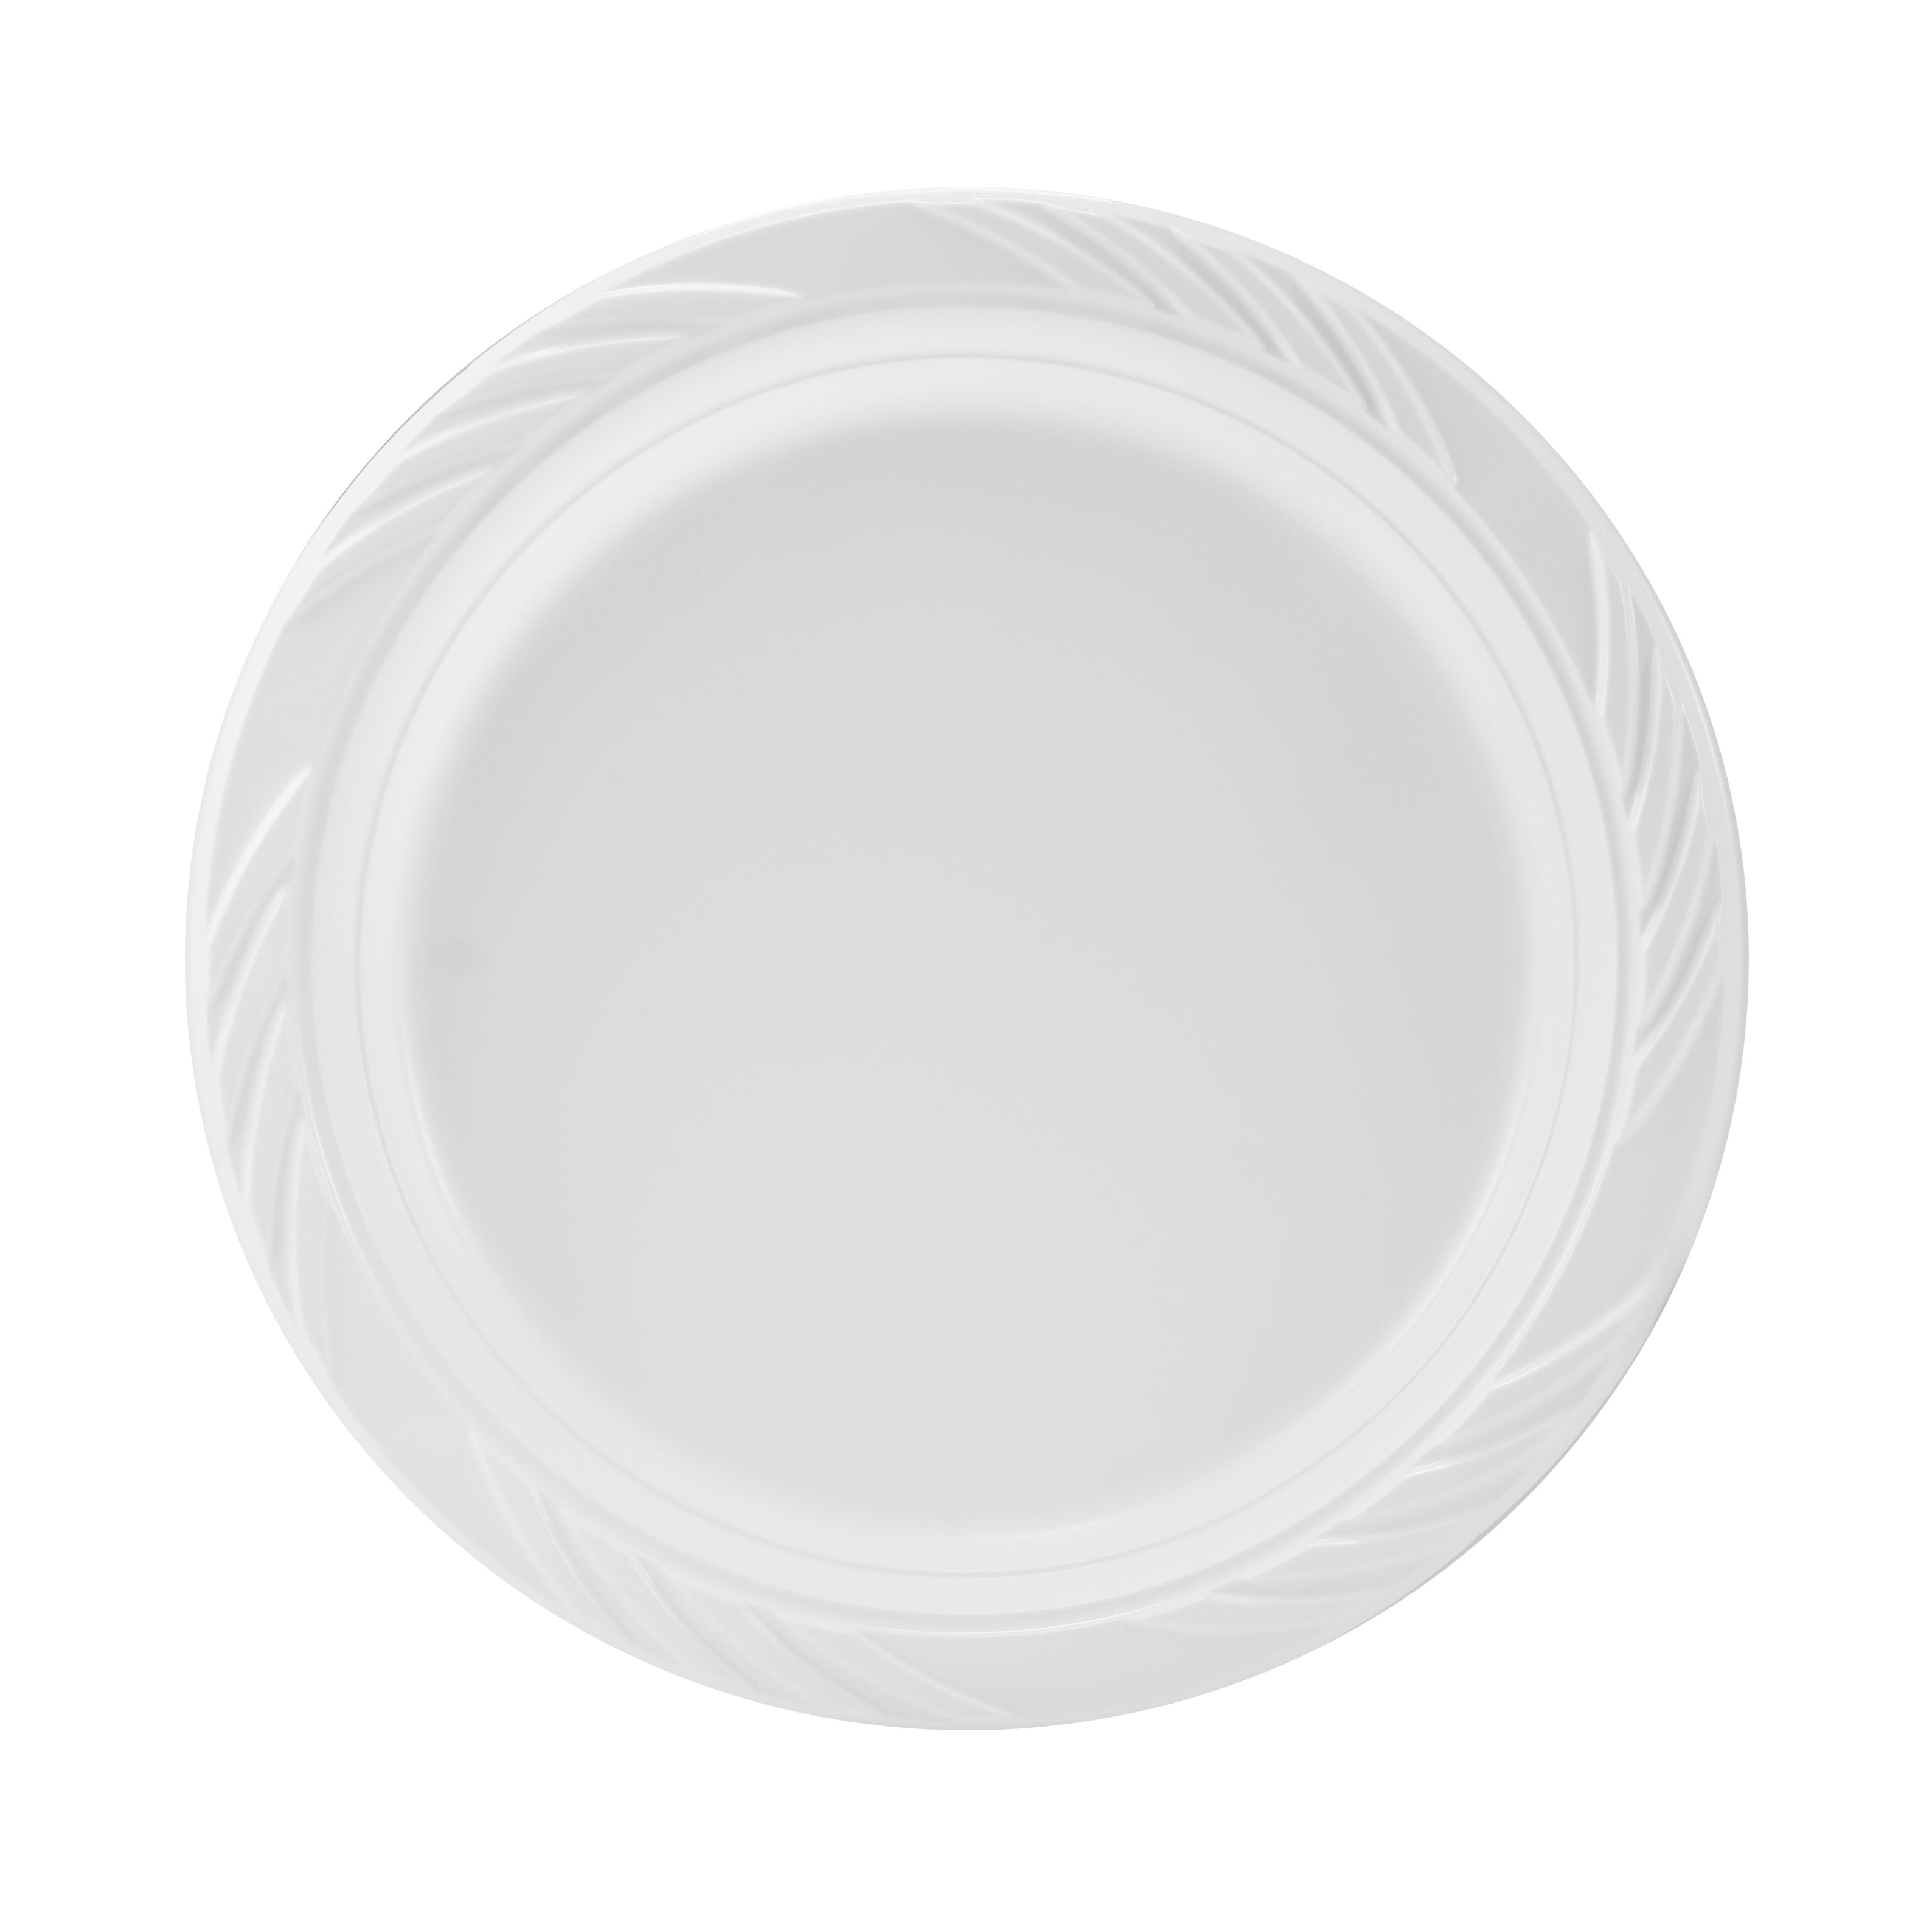 200 PACK] White Disposable Paper Plates 9 Inch by EcoQuality - Perfect for  Parties, BBQ, Catering, Office, Event's, Pizza, Restaurants, Recyclable,  Compostable and Microwave Safe 